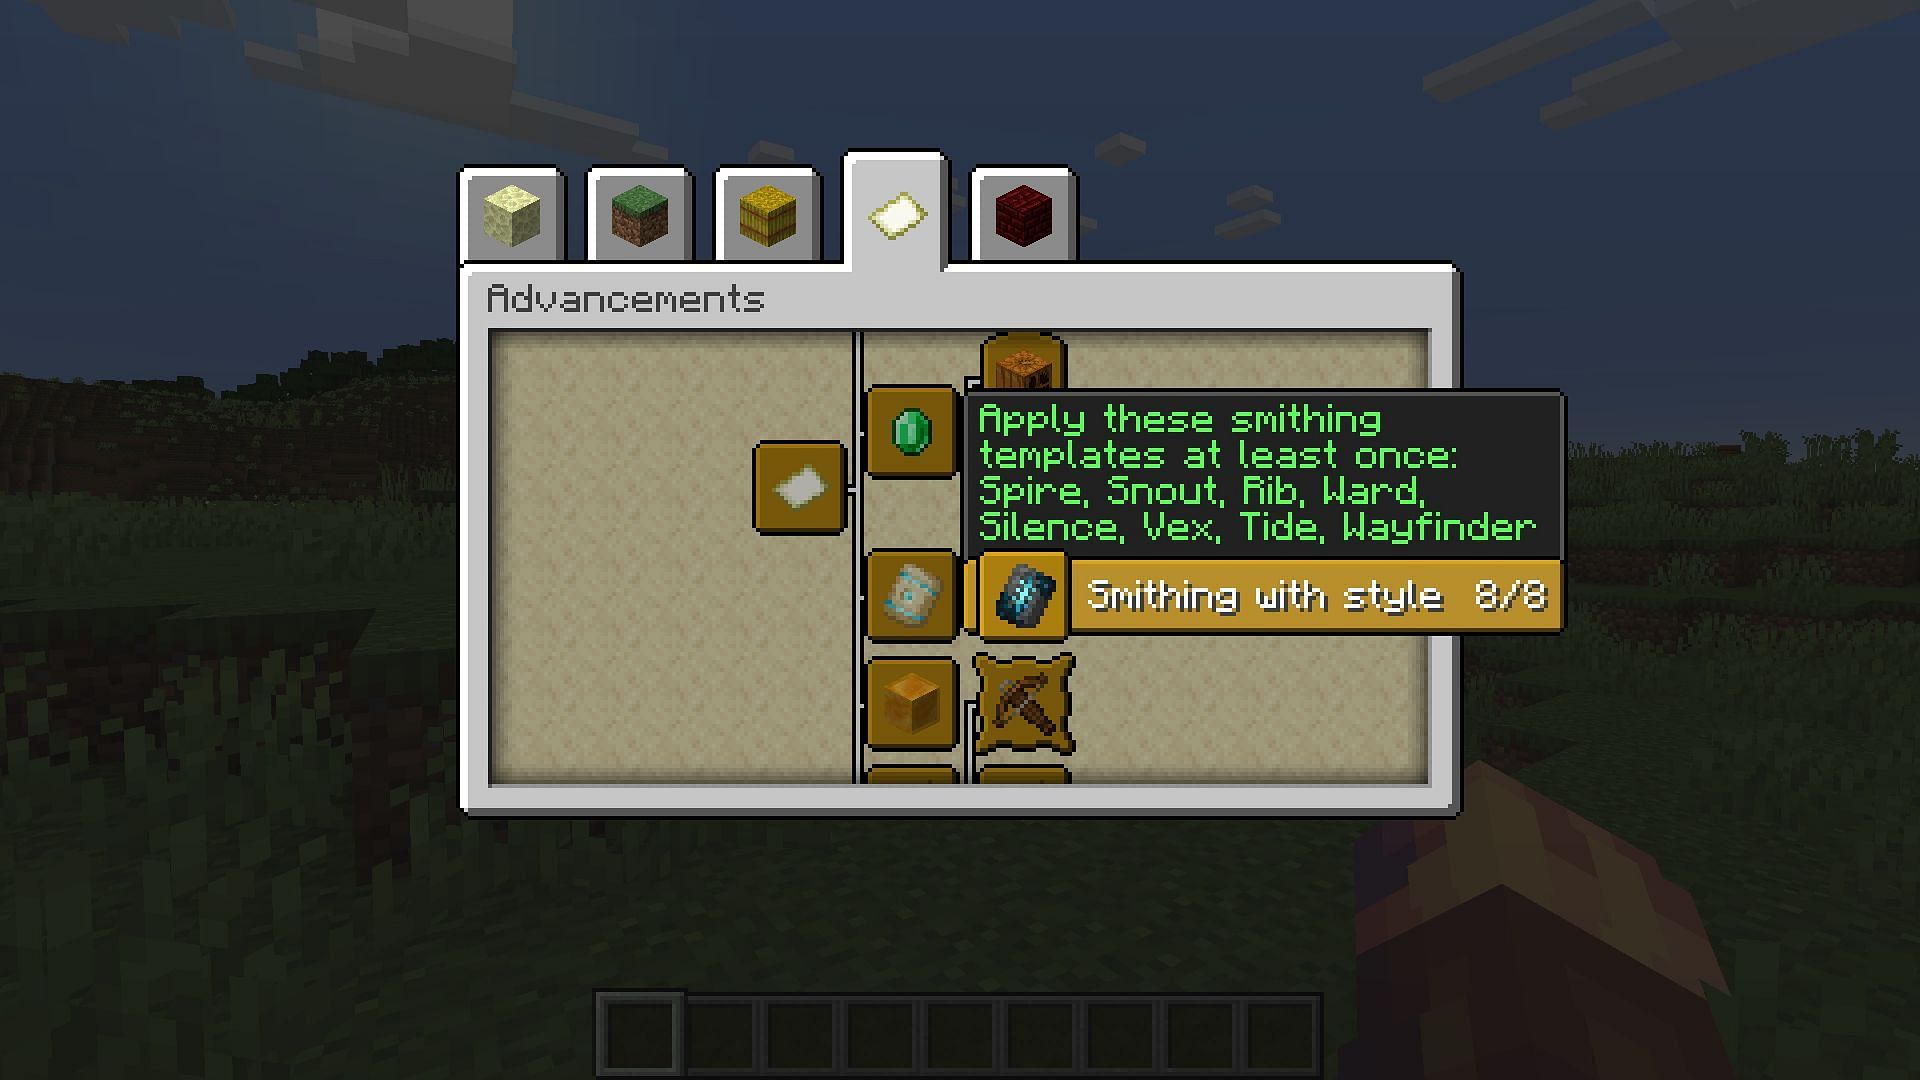 Smithing With Style is one of the latest advancements to be added to Minecraft 1.20 (Image via Mojang)